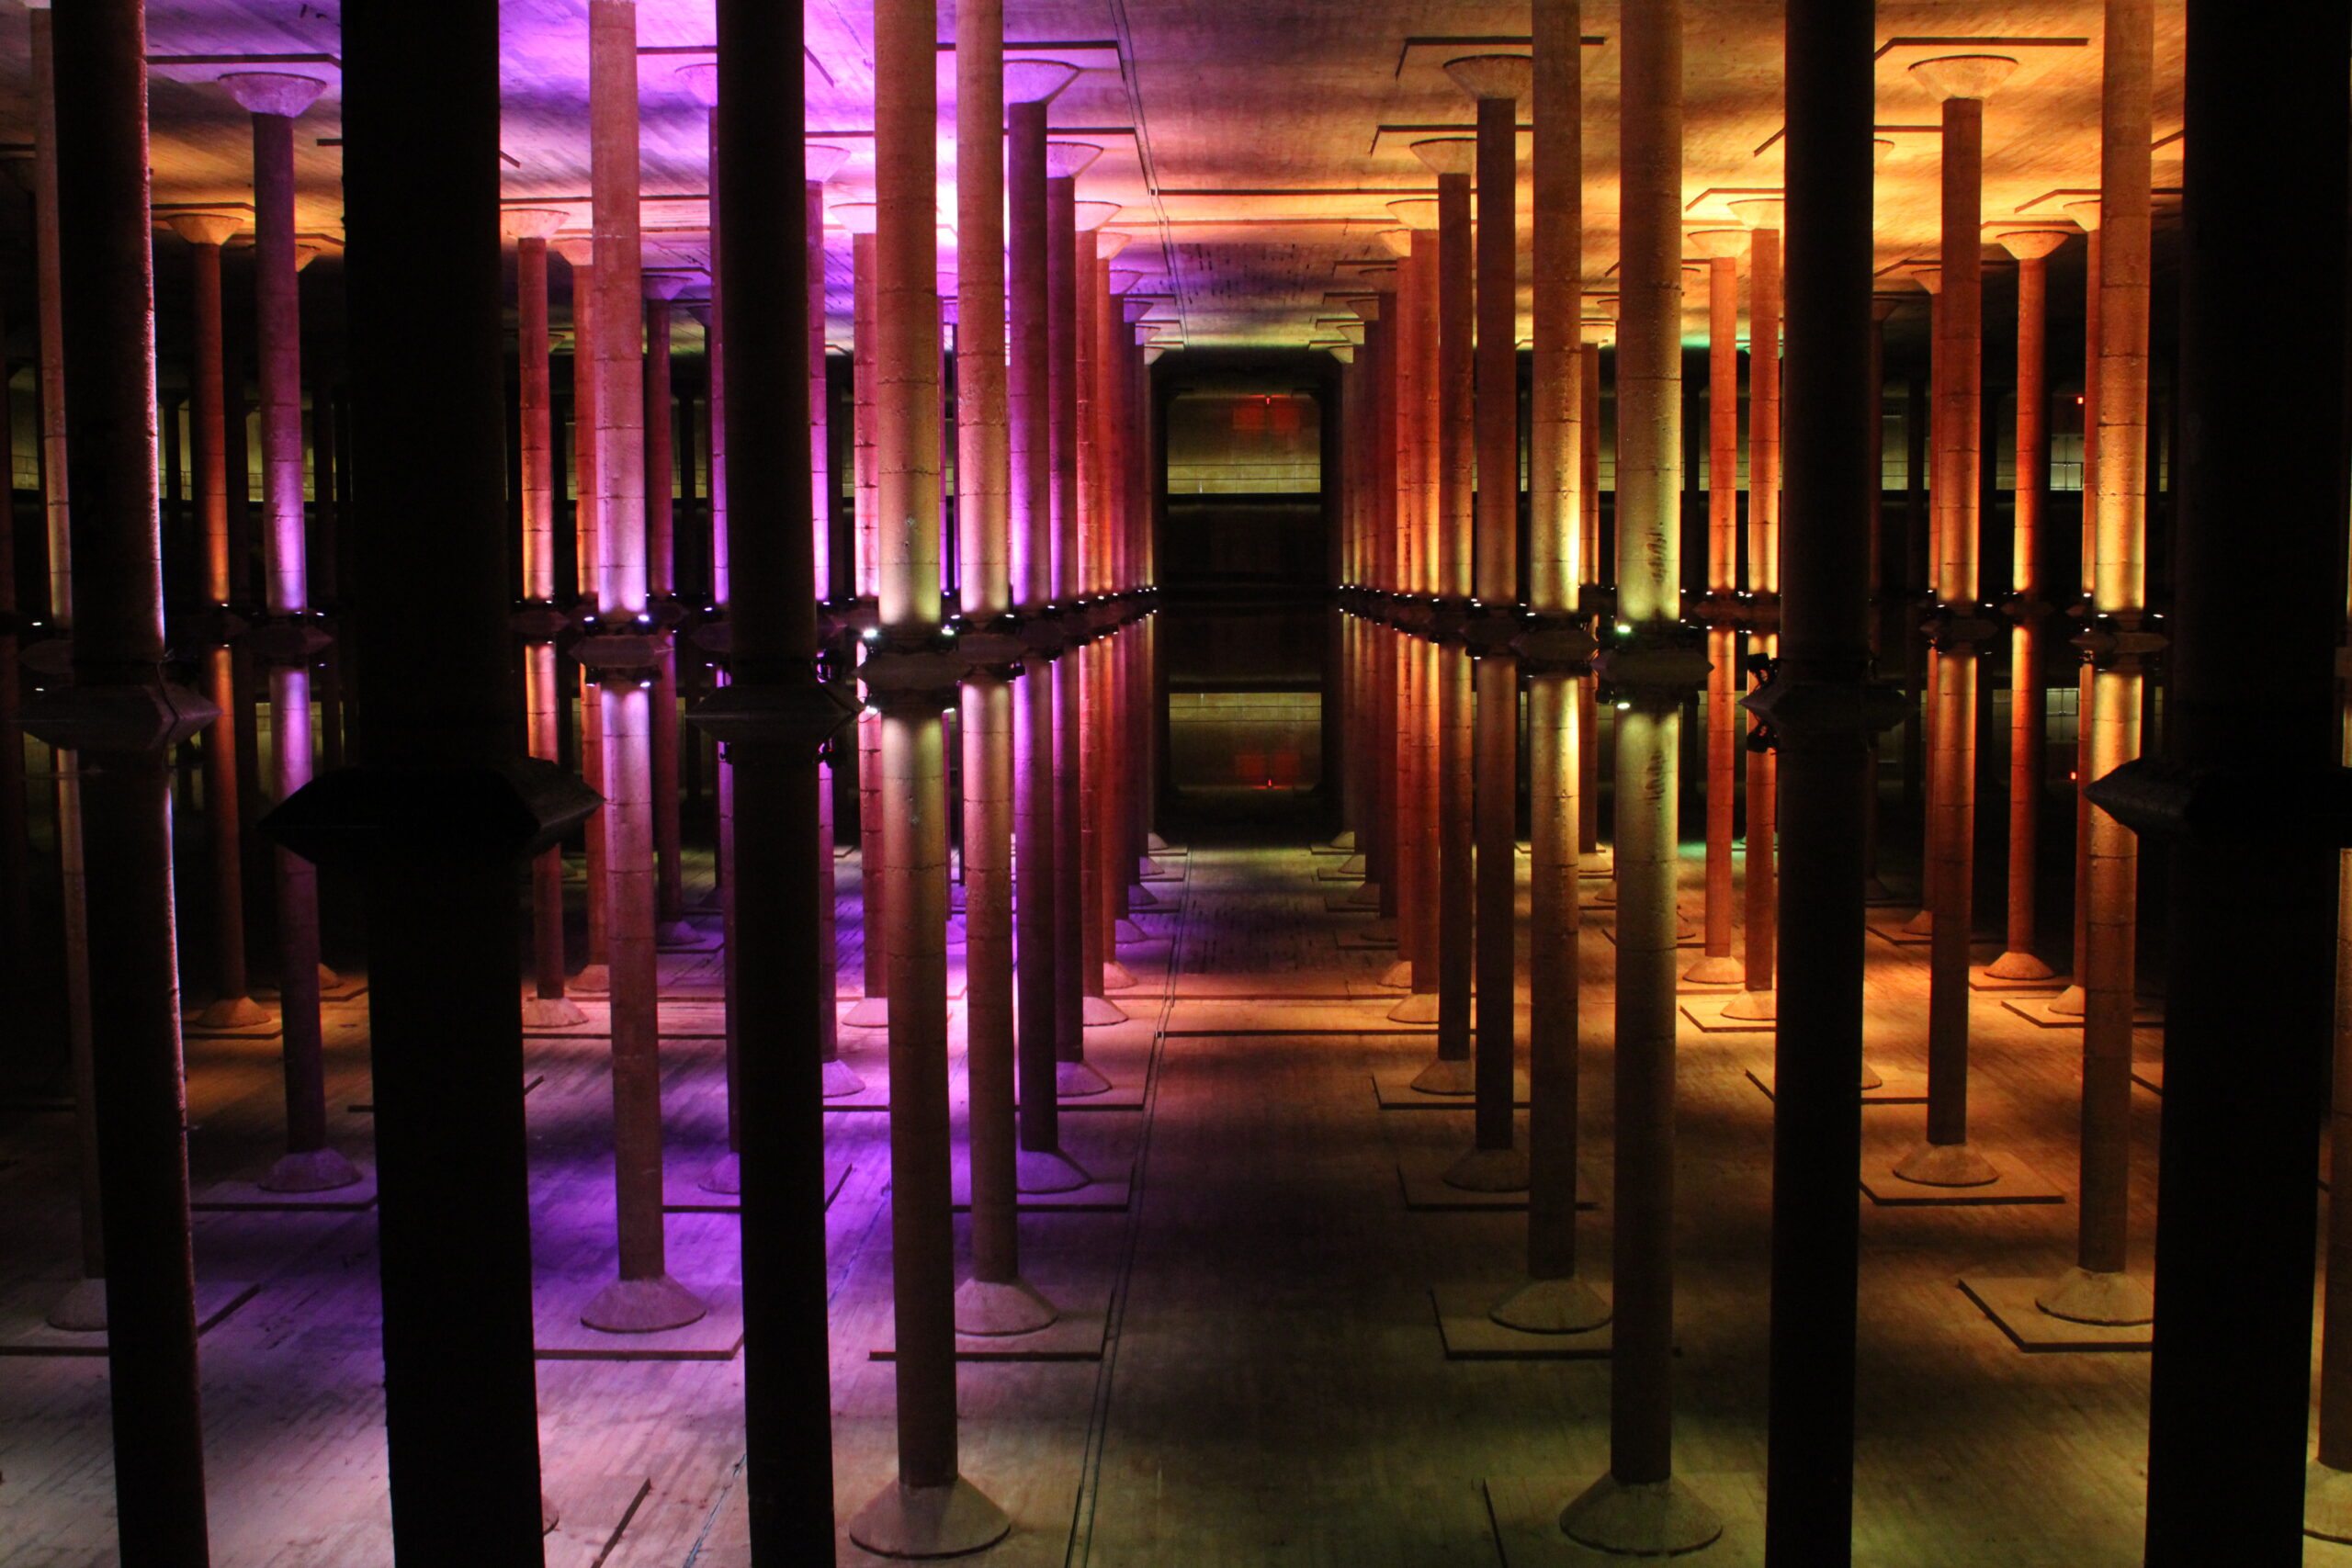 Image Choral Performances in the Cistern